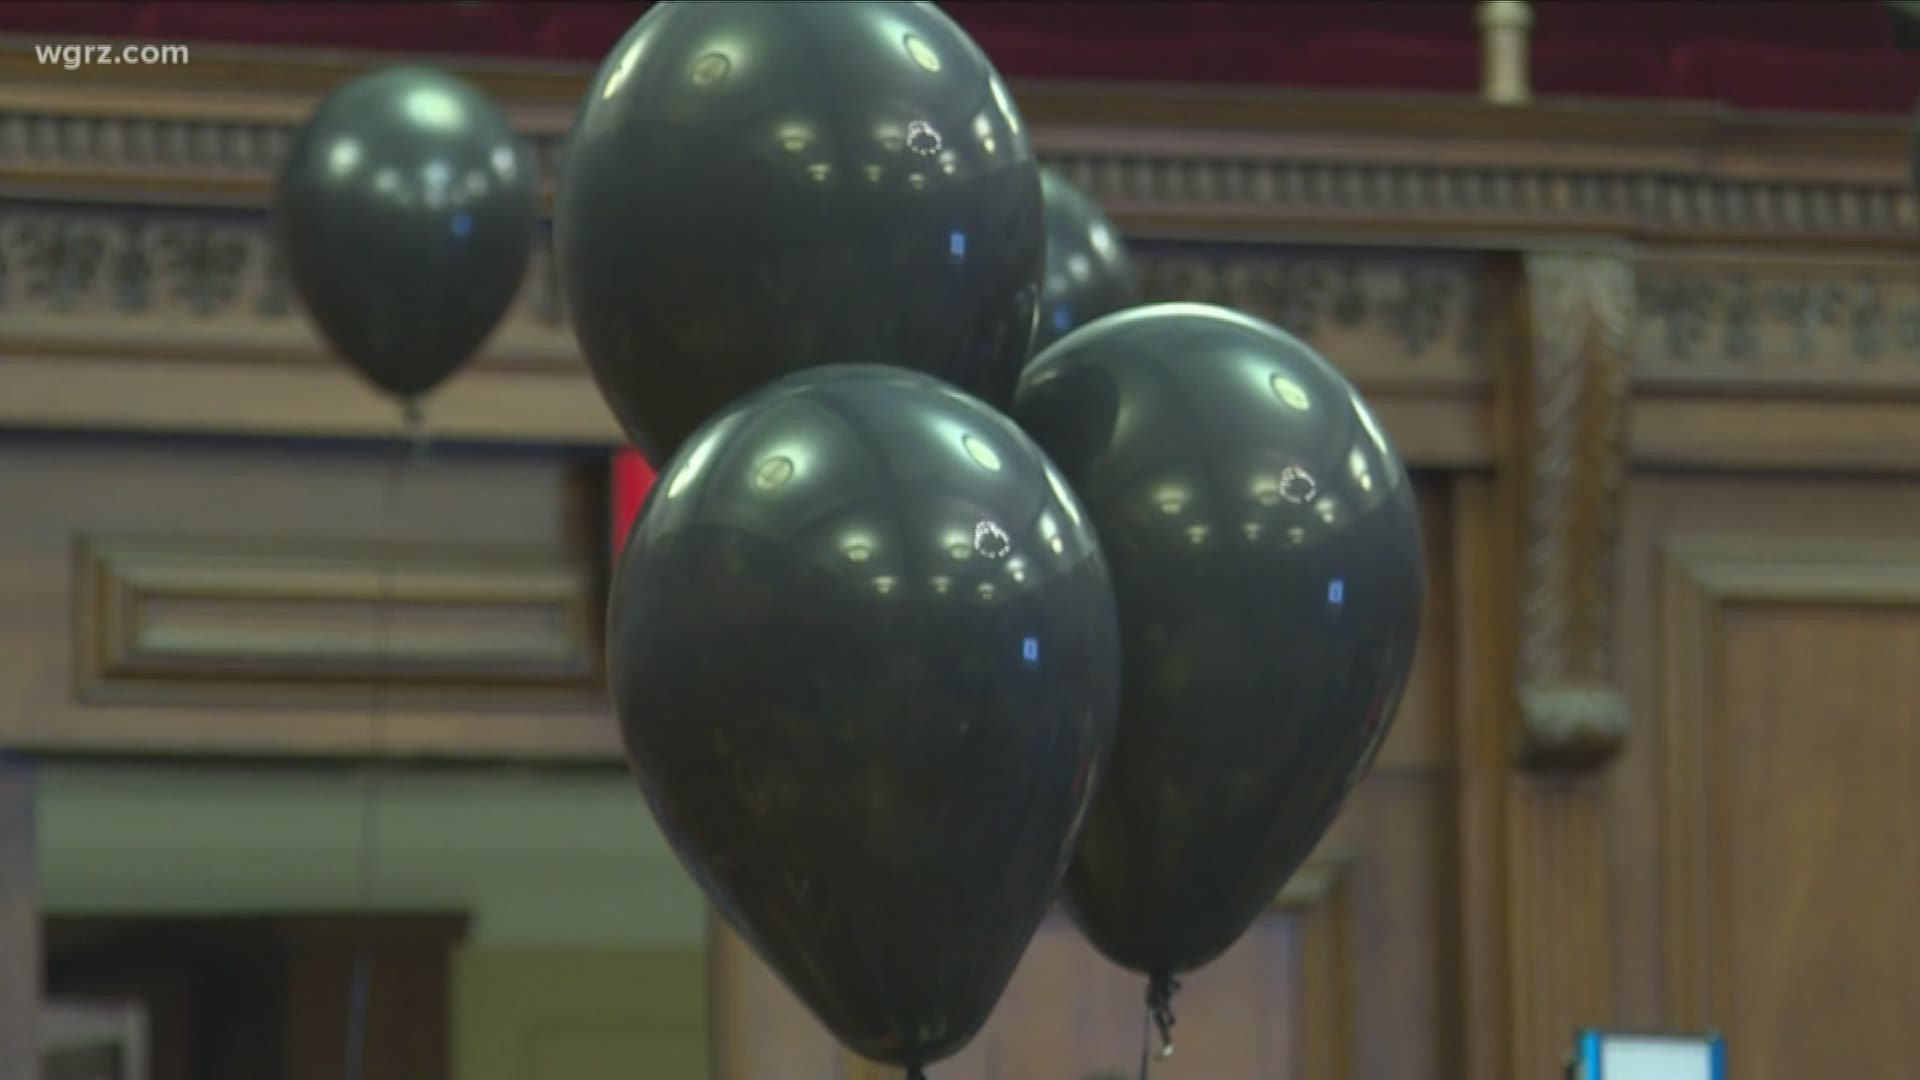 It's a day where those affected by drug over-doses place black balloons on their porches or mailboxes to raise awareness about the epidemic.